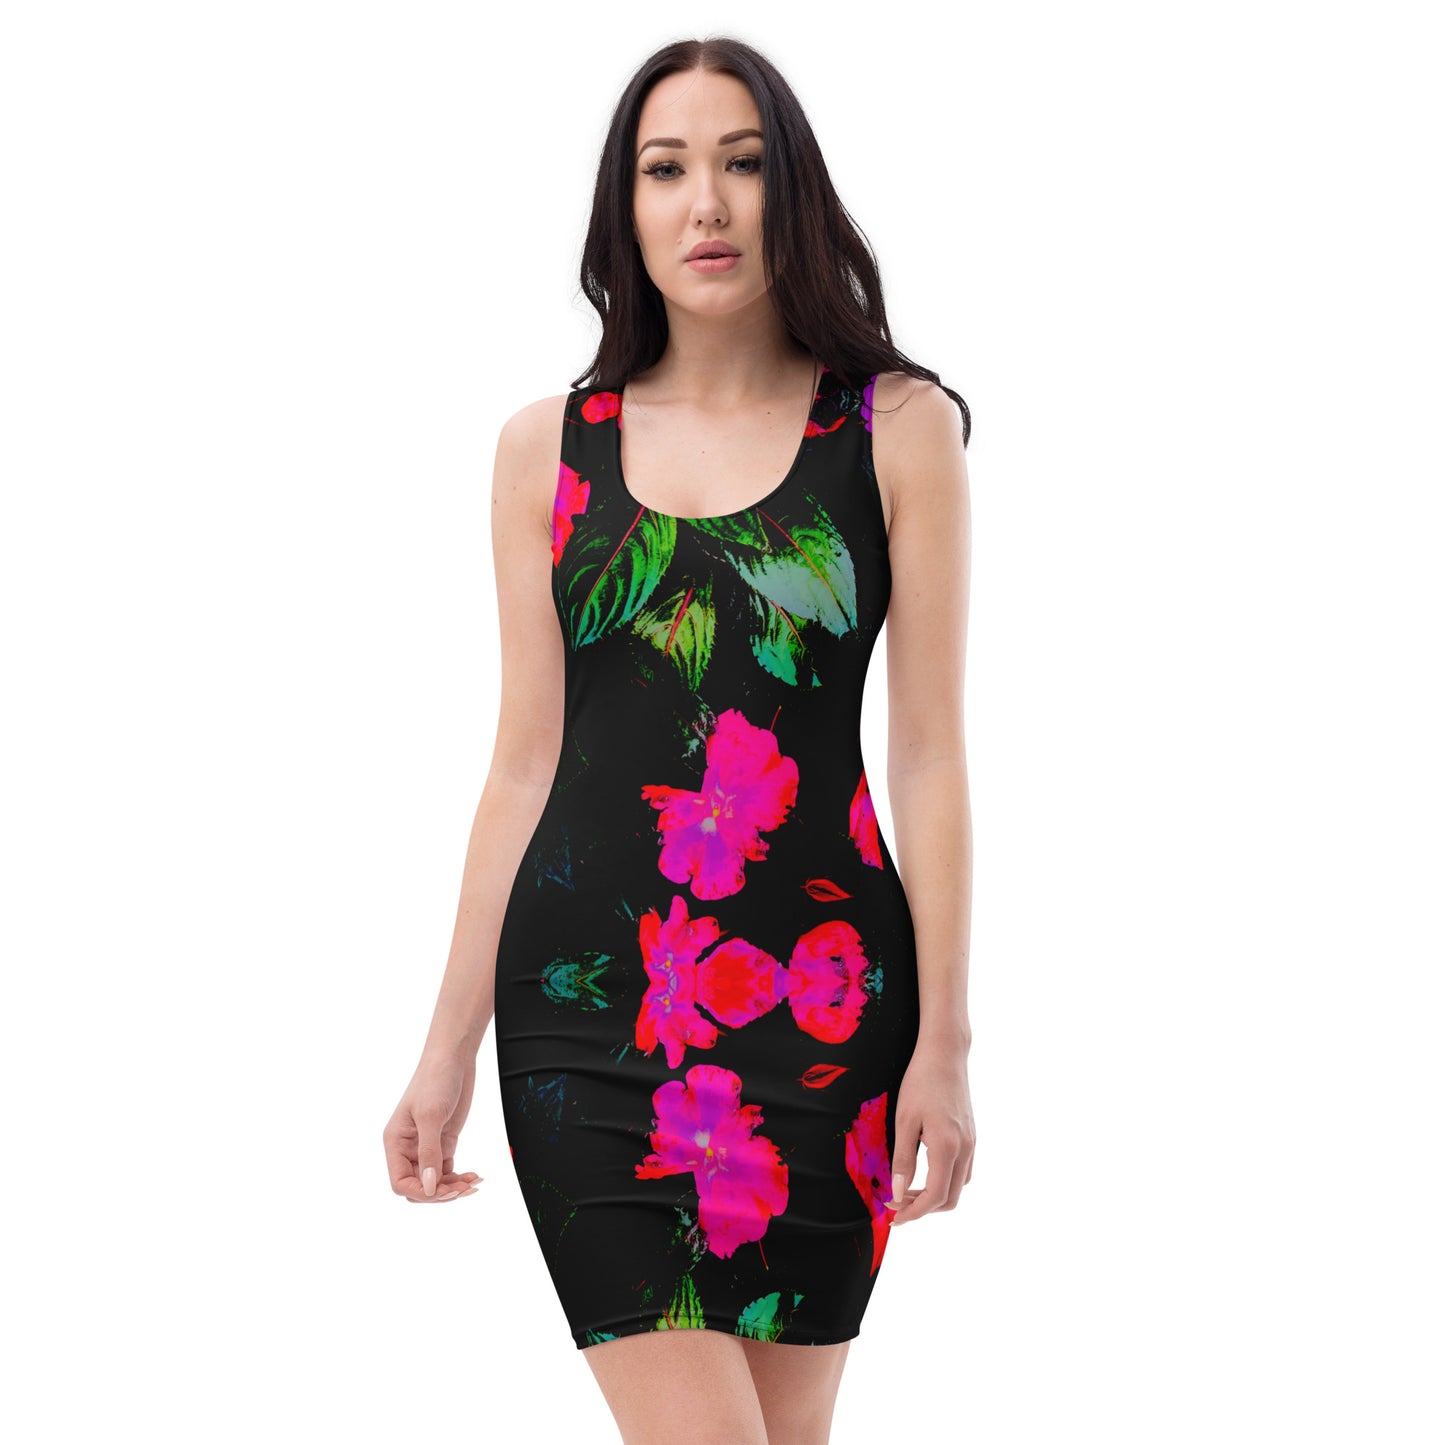 Busy Lizzy Sublime UPF 50+ Slip Dress